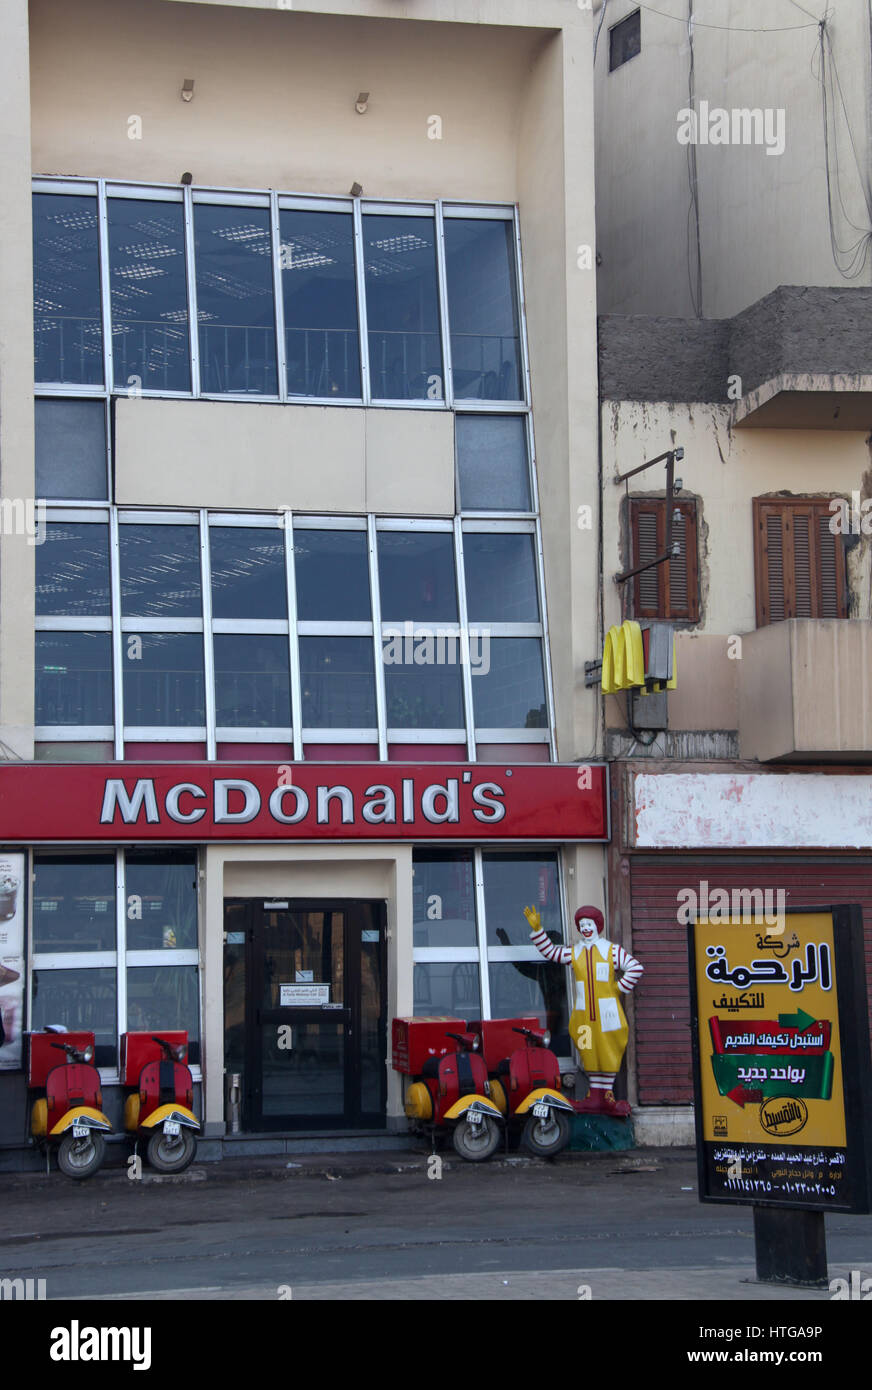 McDonalds Fast Food Restaurant at Luxor in Egypt Stock Photo